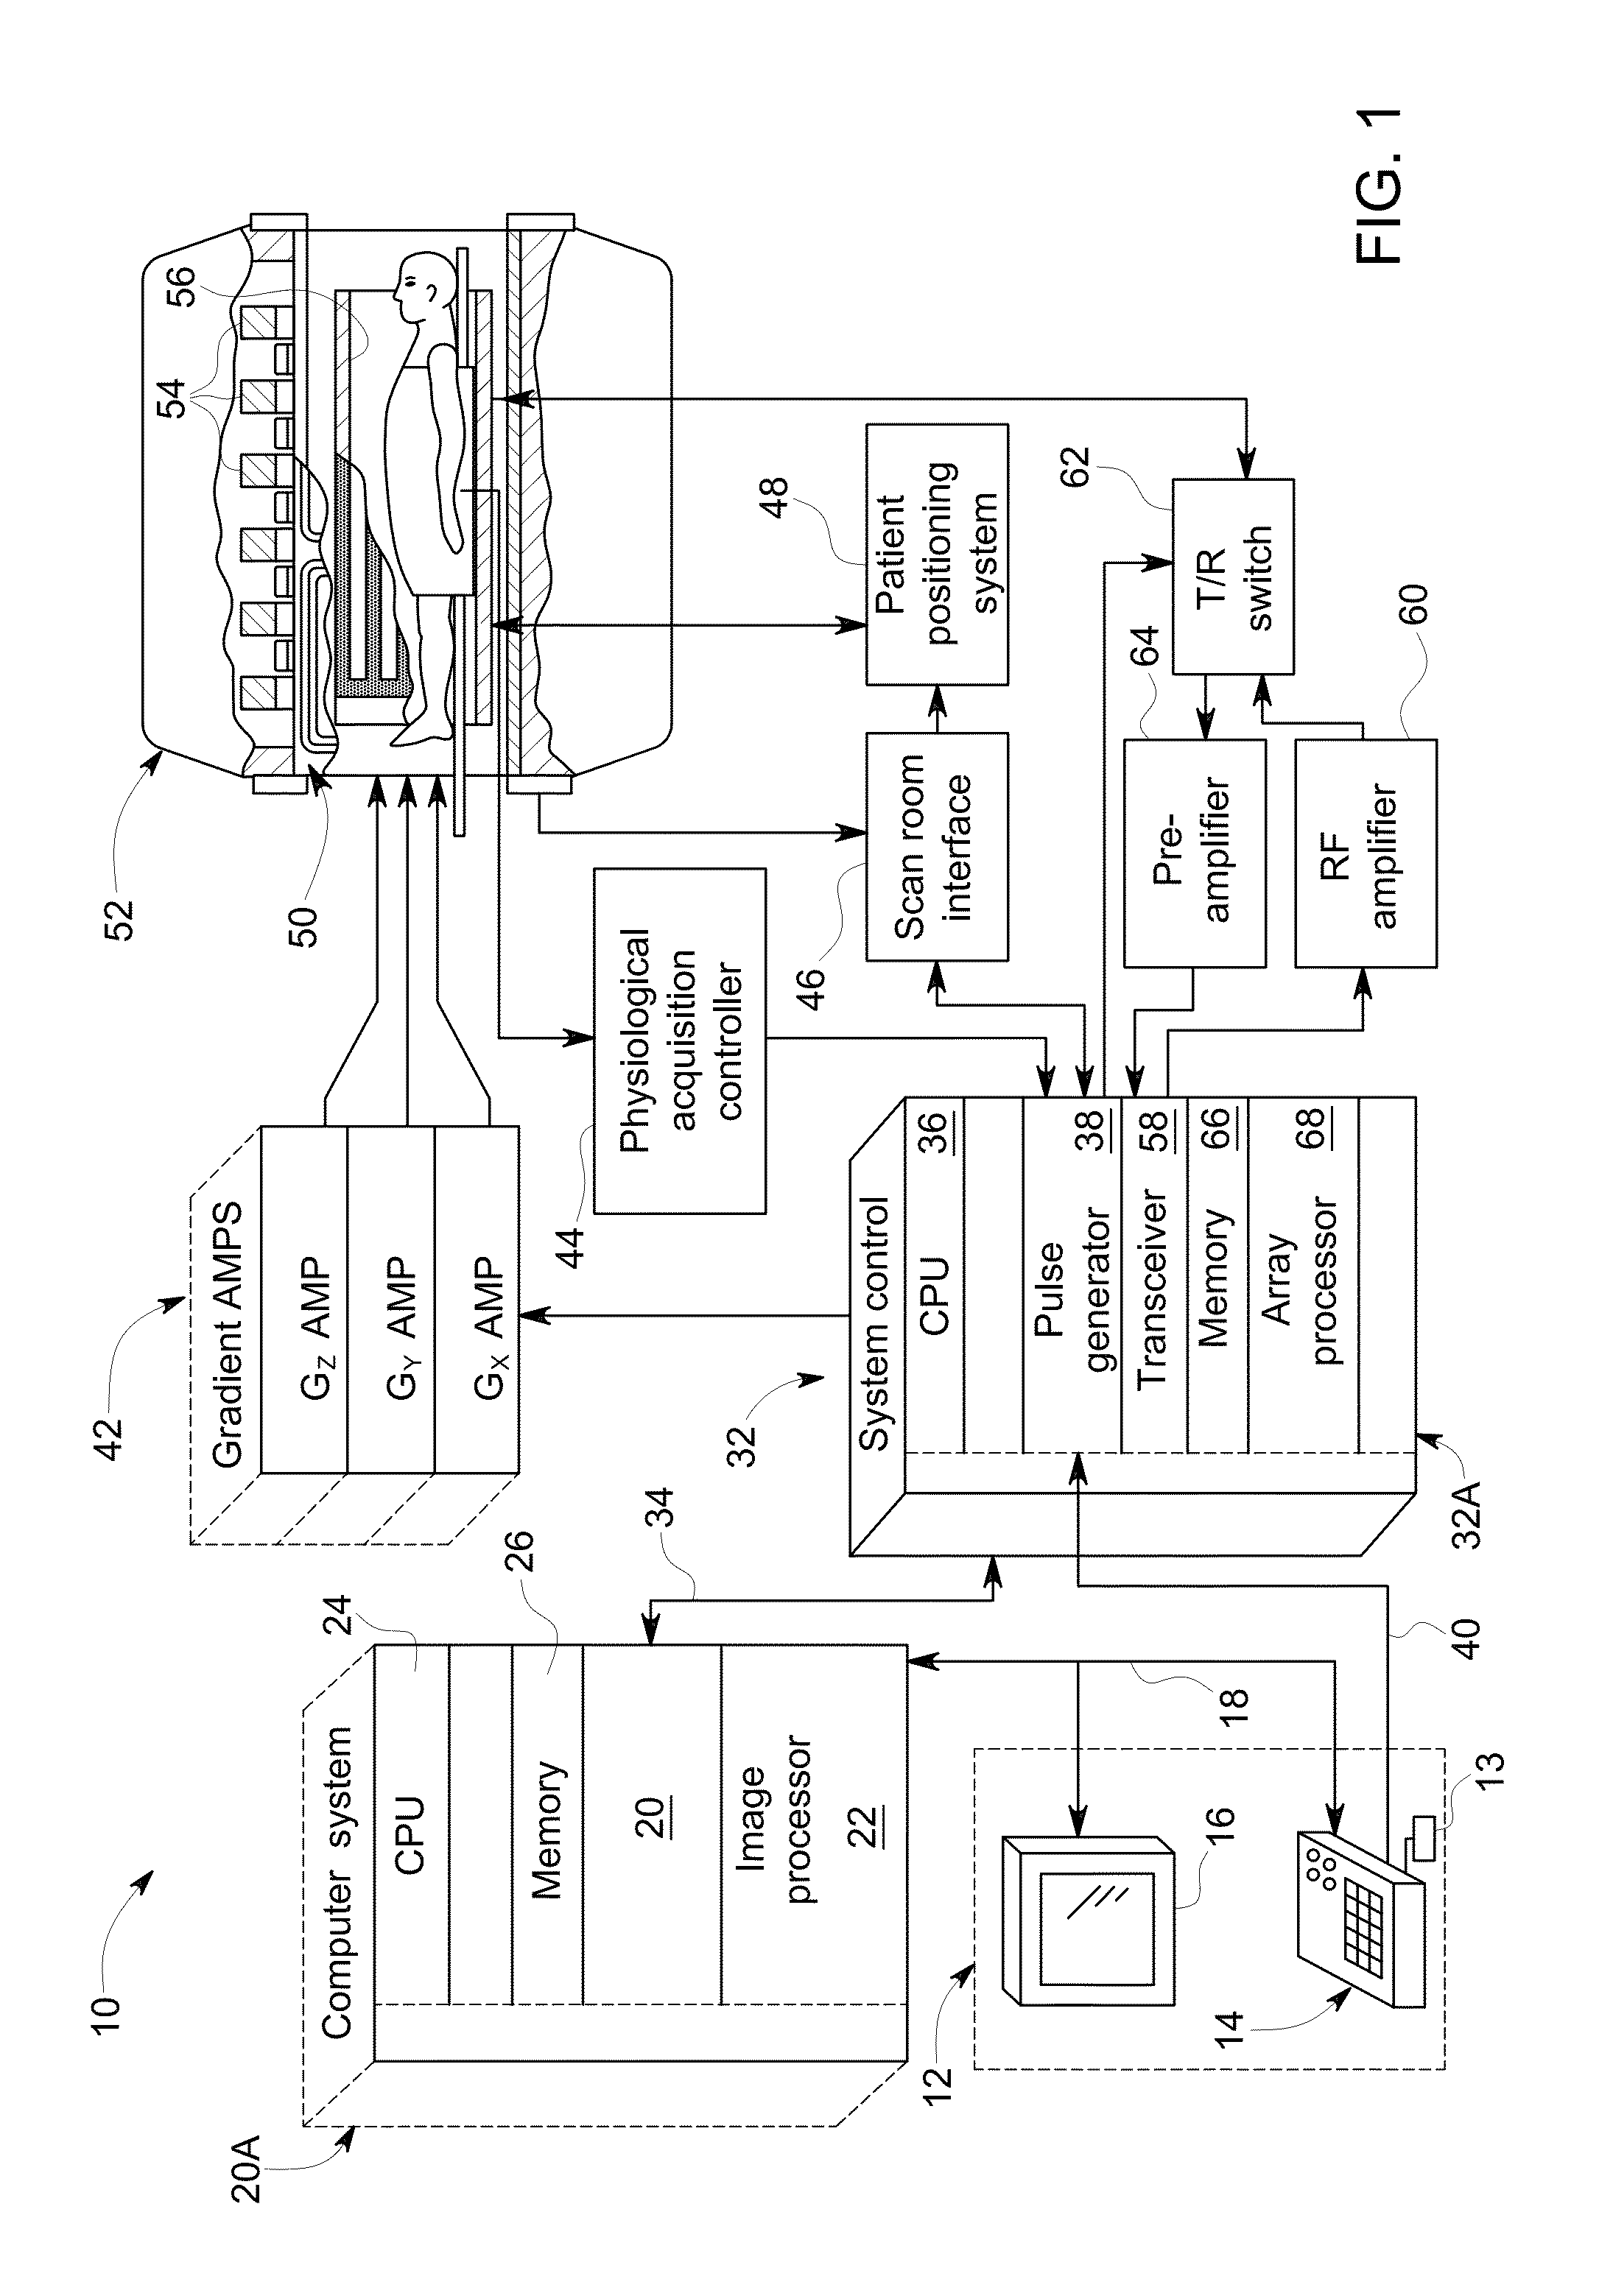 System and method for reducing localized signal fluctuation